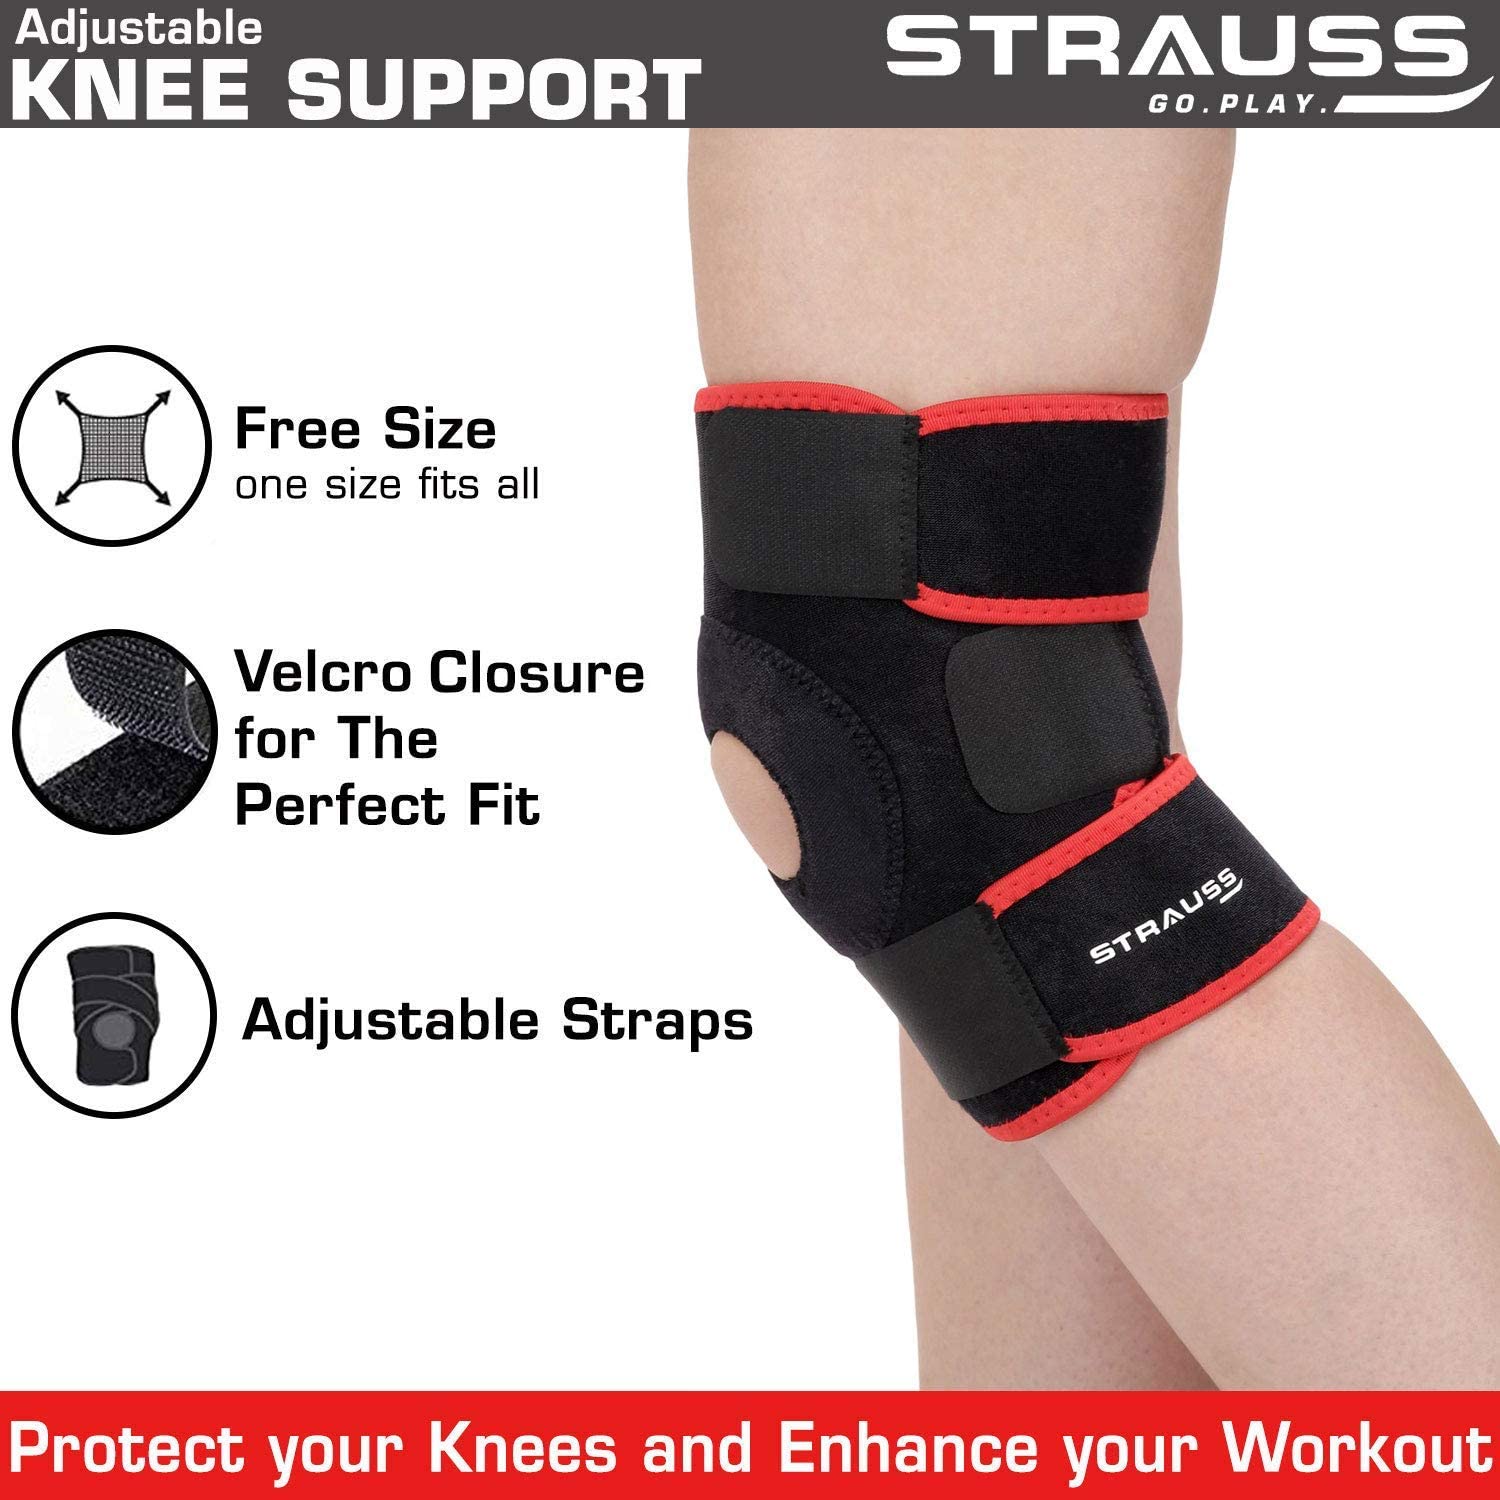 STRAUSS Adjustable Knee Support Patella|knee support for men and women|knee cap|Knee brace|Knee Guard |Knee Cap|Knee pain relief |Knee belt|Joint pain relief | Single (Free Size, Black/Red)